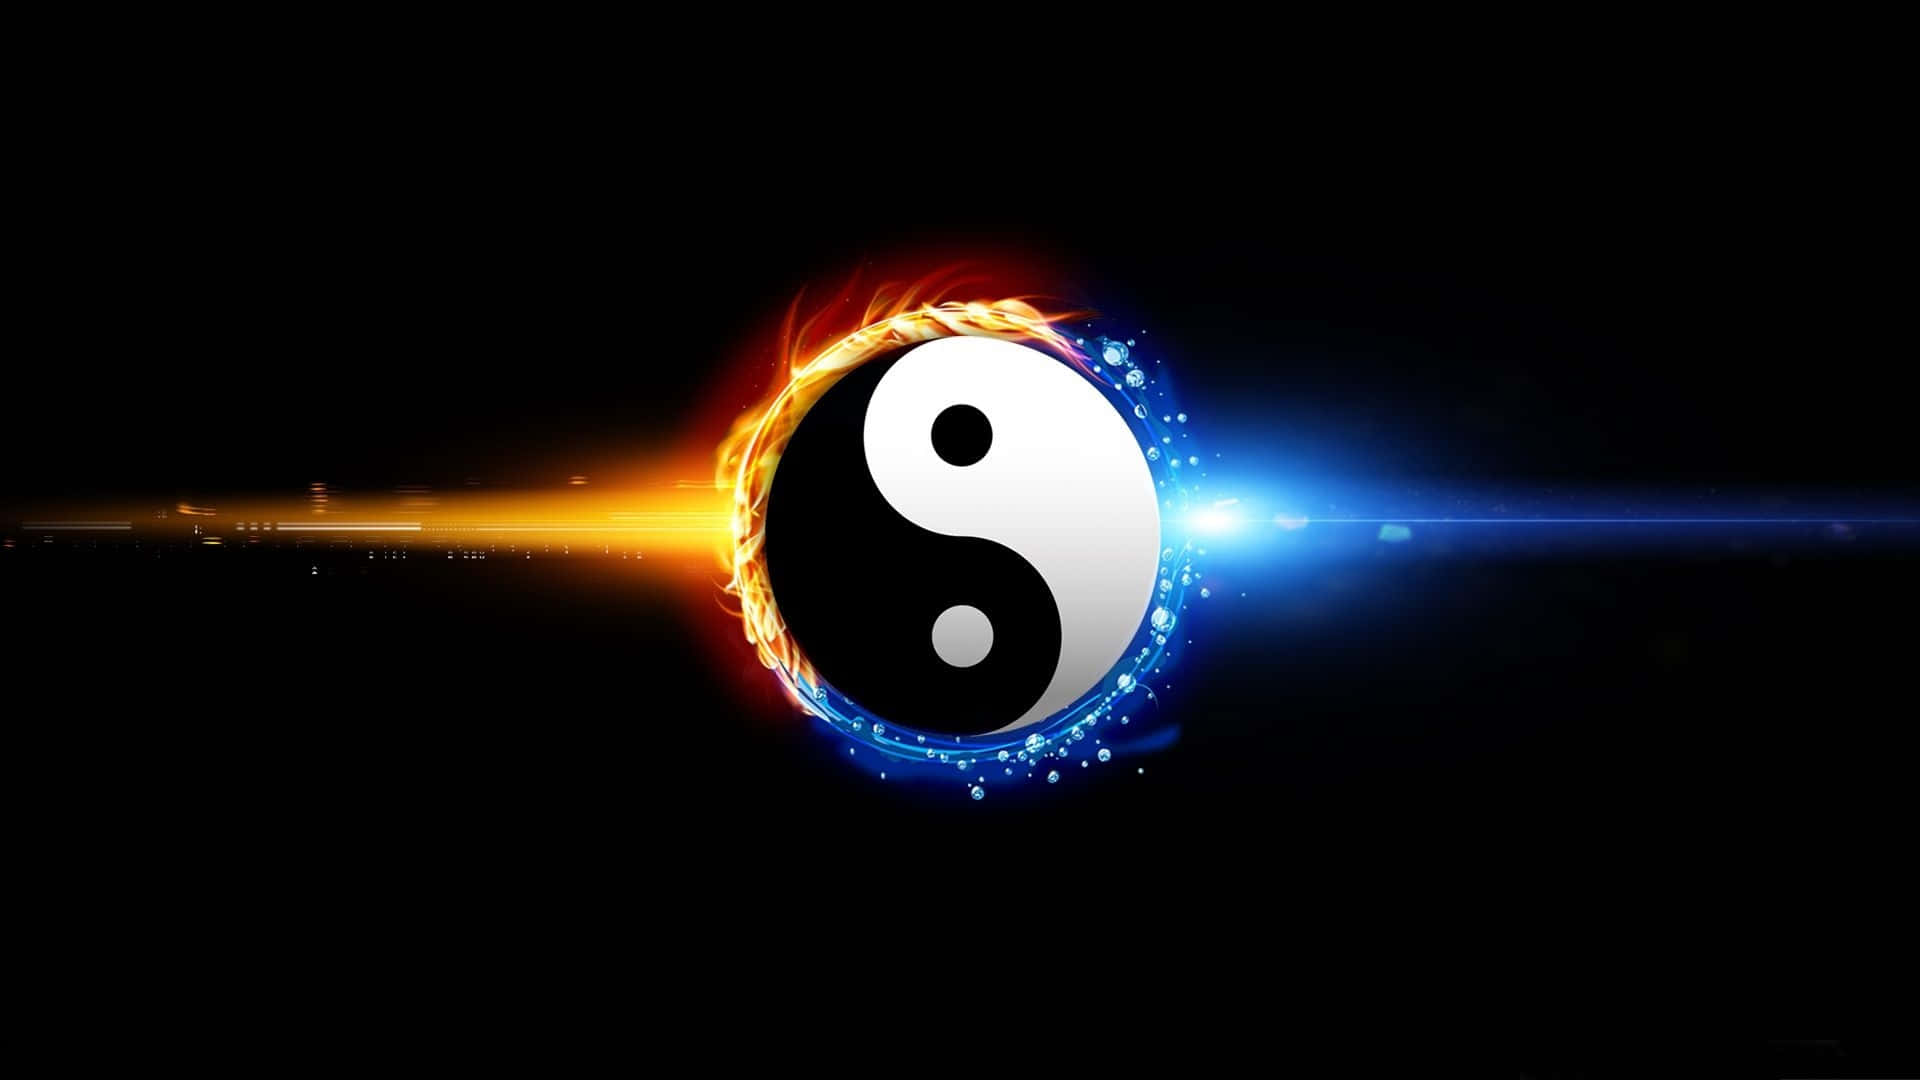 Download Yin Yang 4K With Fire And Water Wallpaper